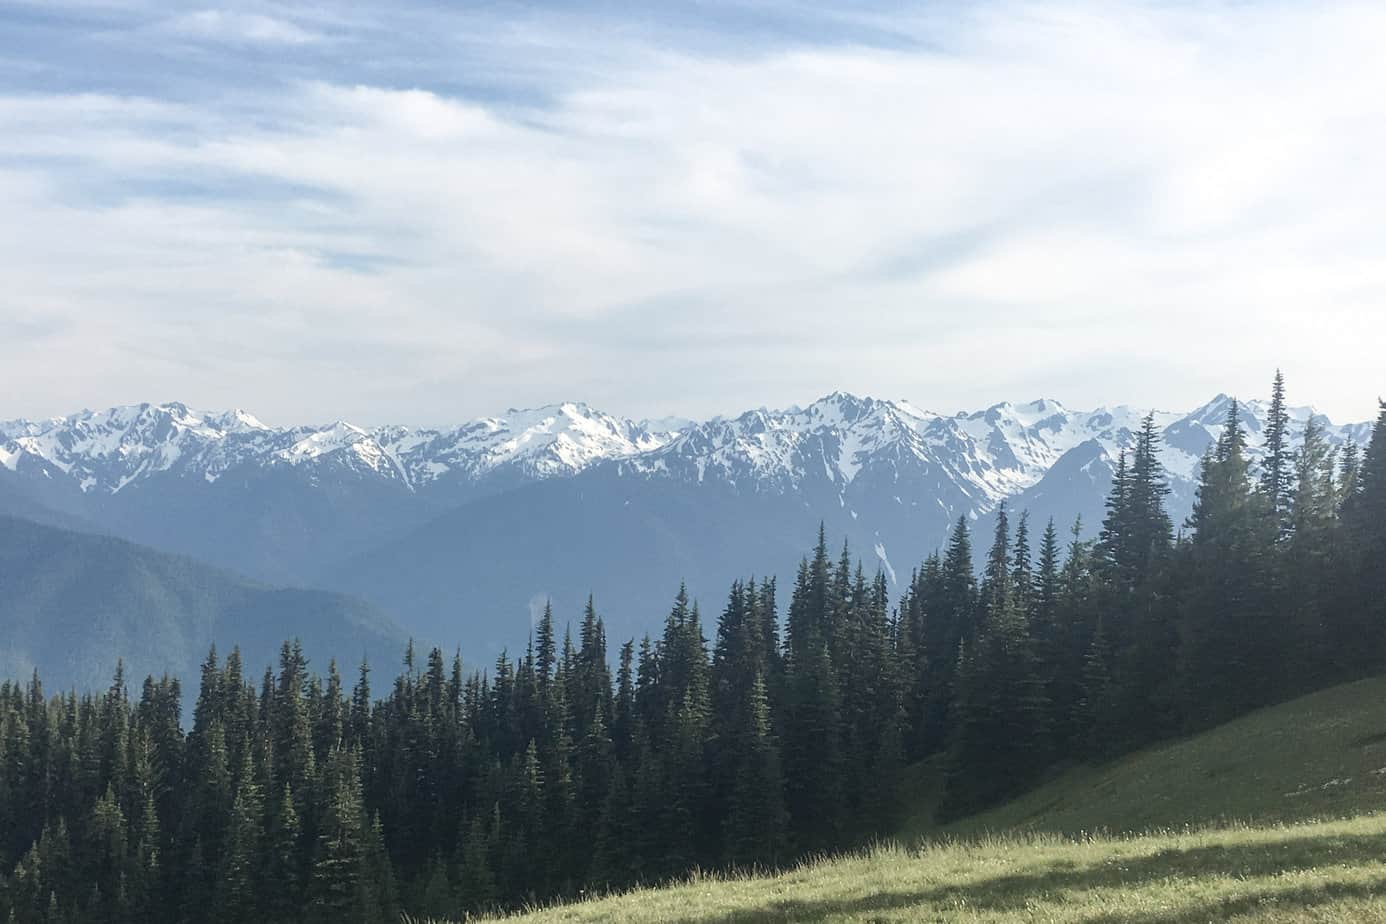 Hurricane Ridge View. Snow-capped rigged mountains under a cloudy sky. With pine trees and a meadow in te foreground.